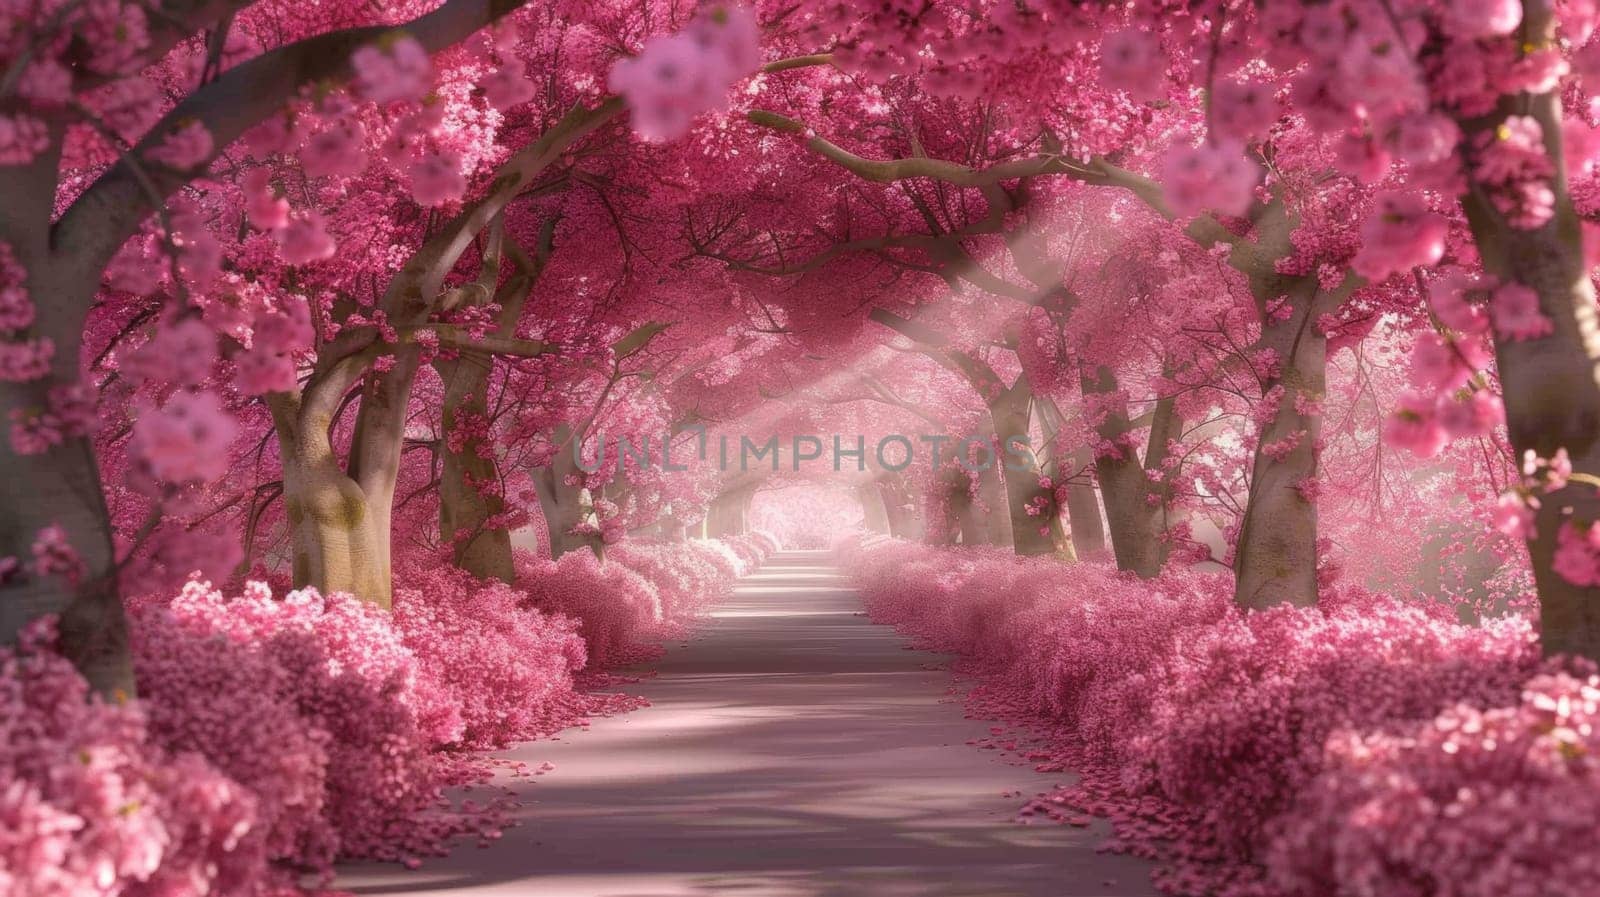 A path lined with pink flowers and trees in the background